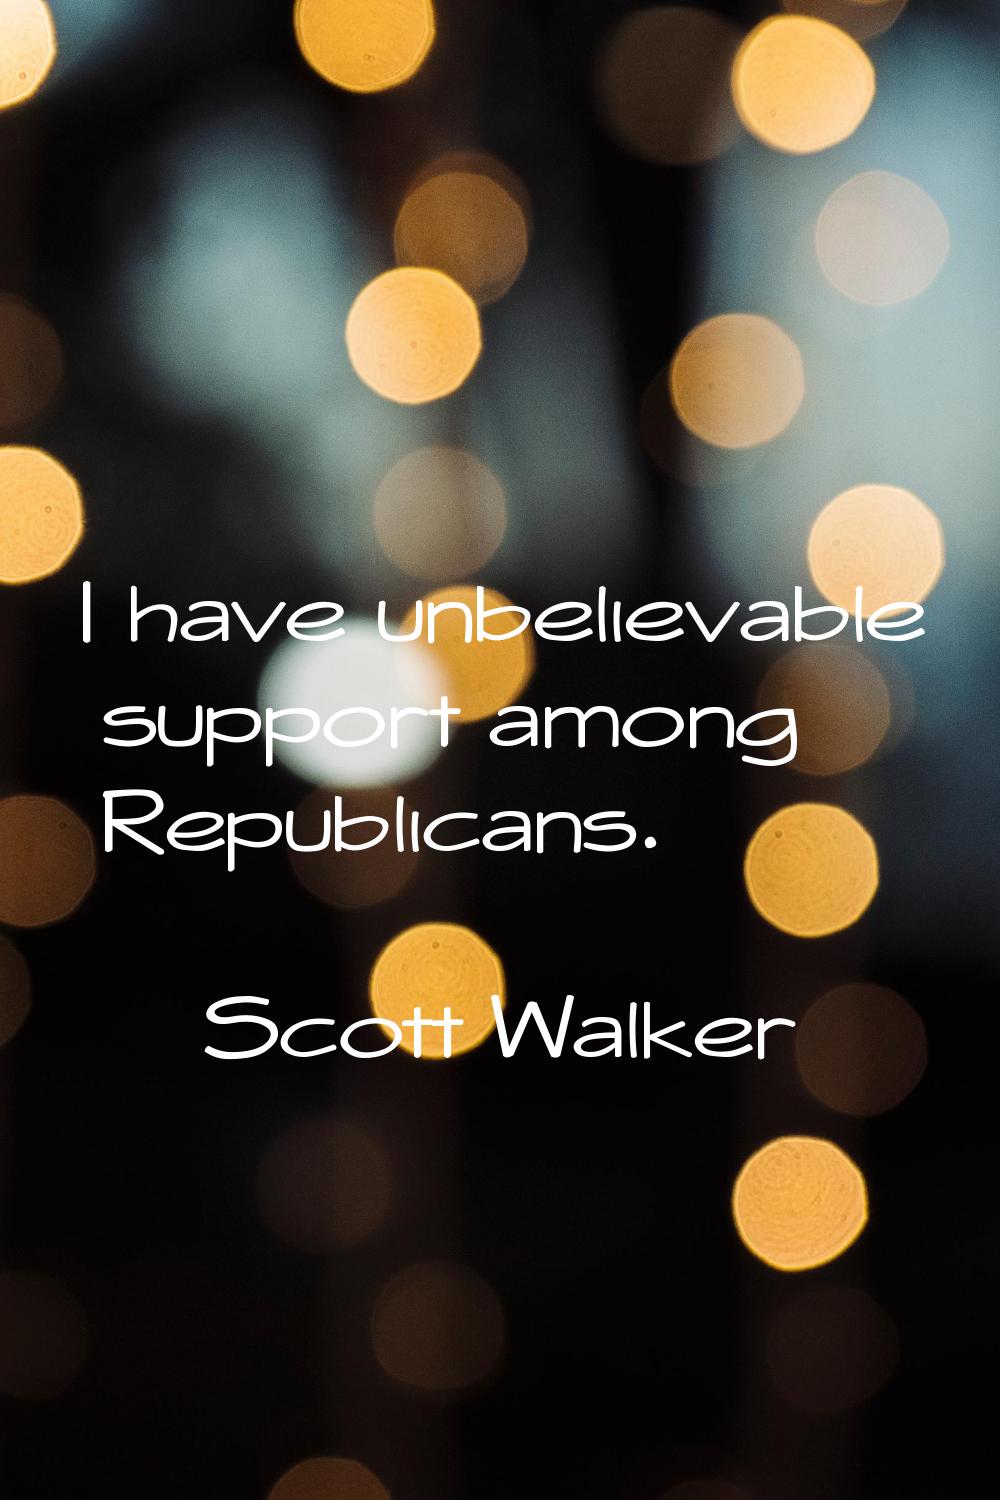 I have unbelievable support among Republicans.